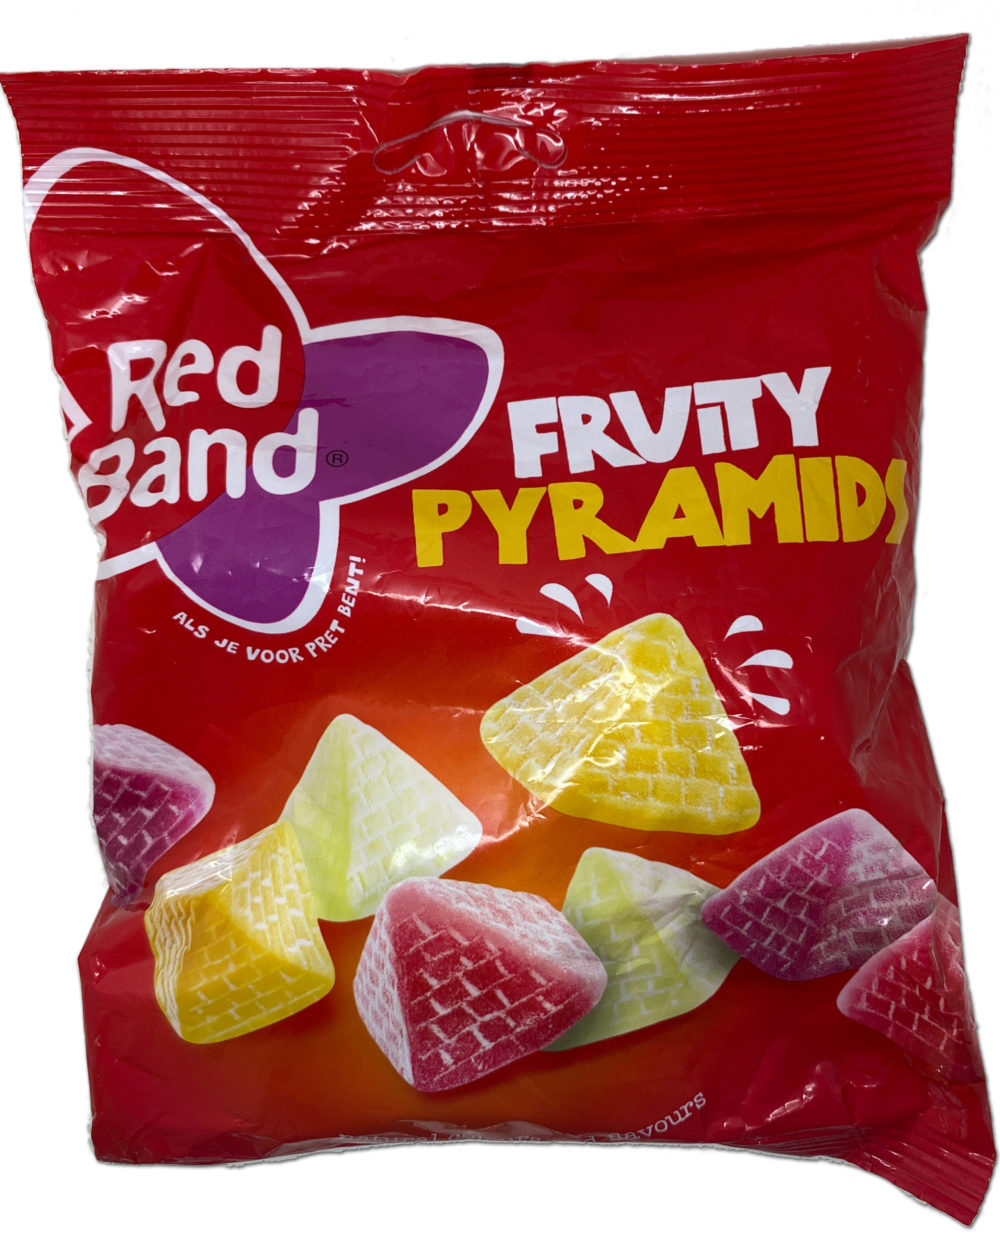 Red Band Fruity Pyramids